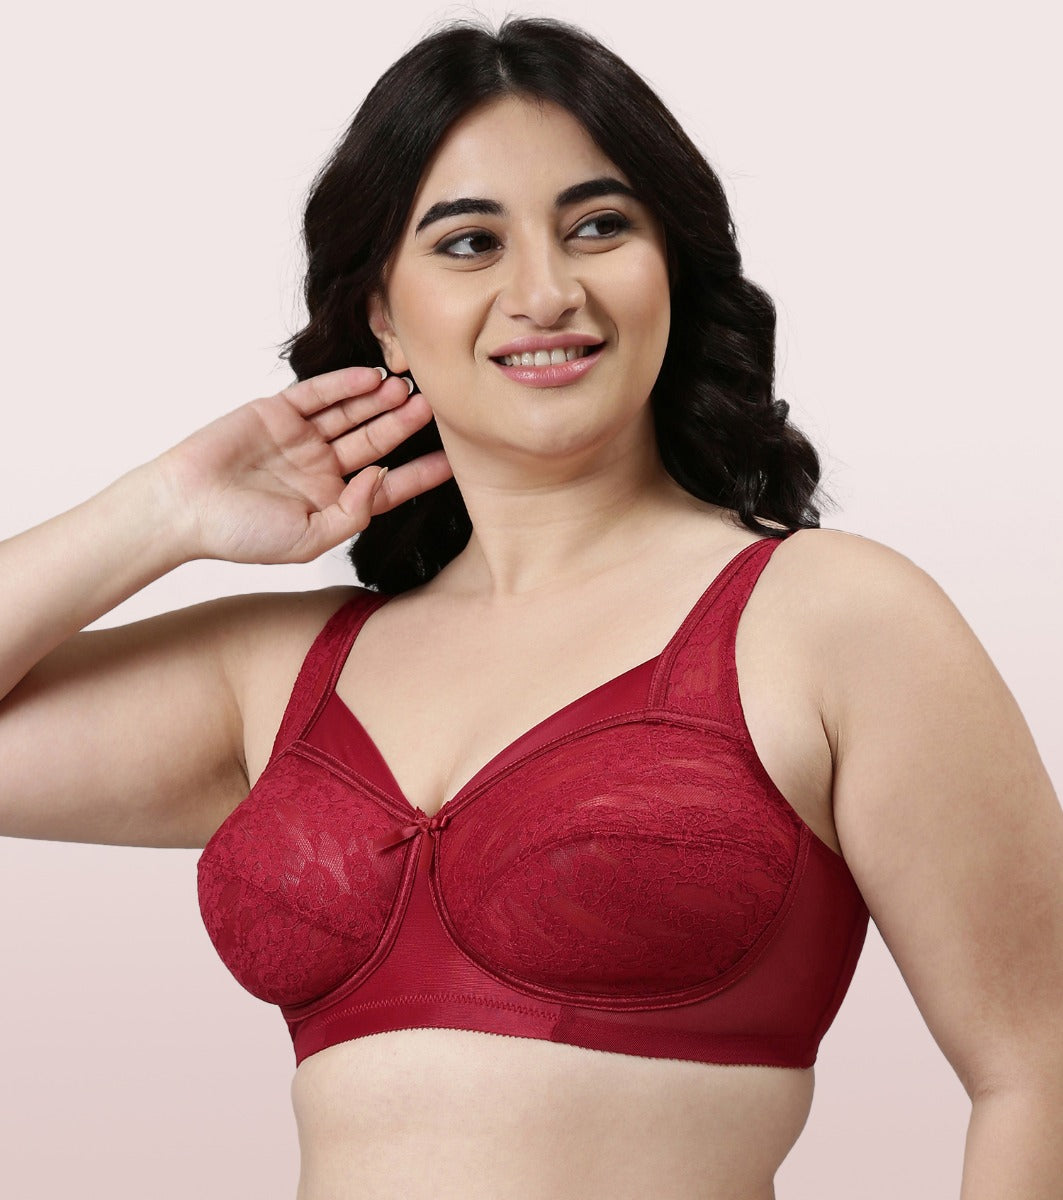 Enamor Full Support Classic Lace Lift Bra For Women - Non-Padded, Non